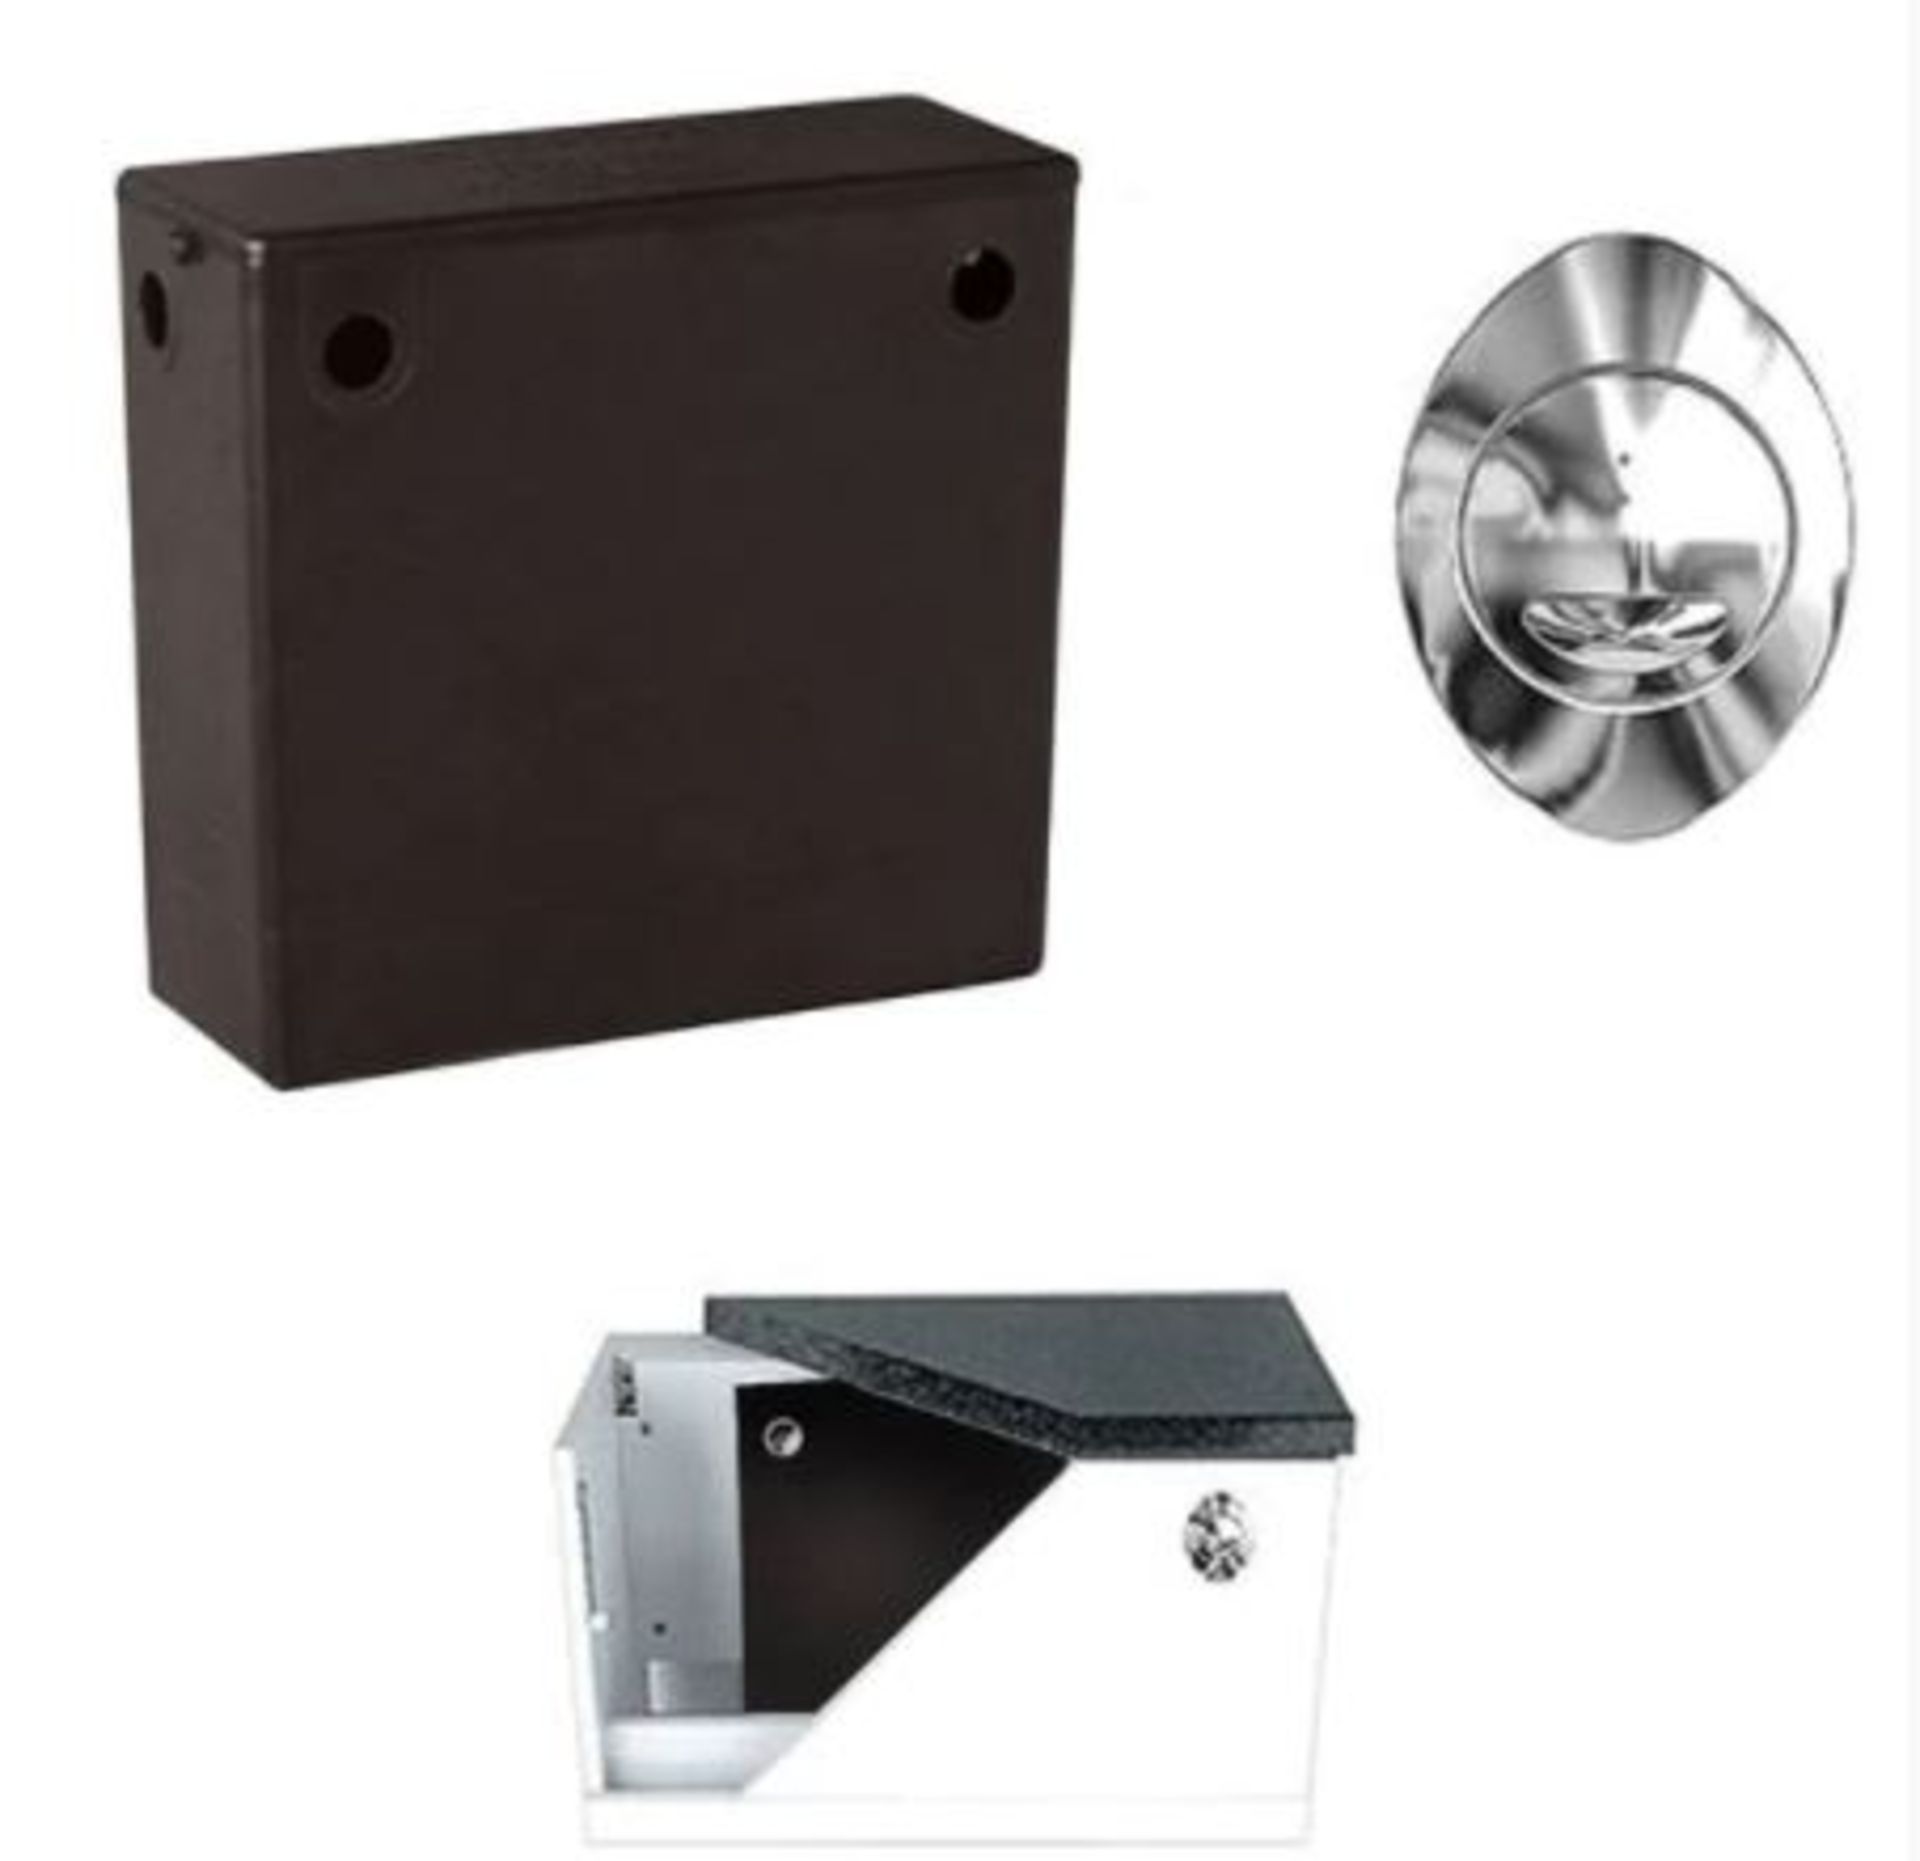 13 Items. 1 X Macdee Wirquin Concealed Toilet Cistern With Bottom Water Inlet Product Code: Cnc100 - Image 15 of 19